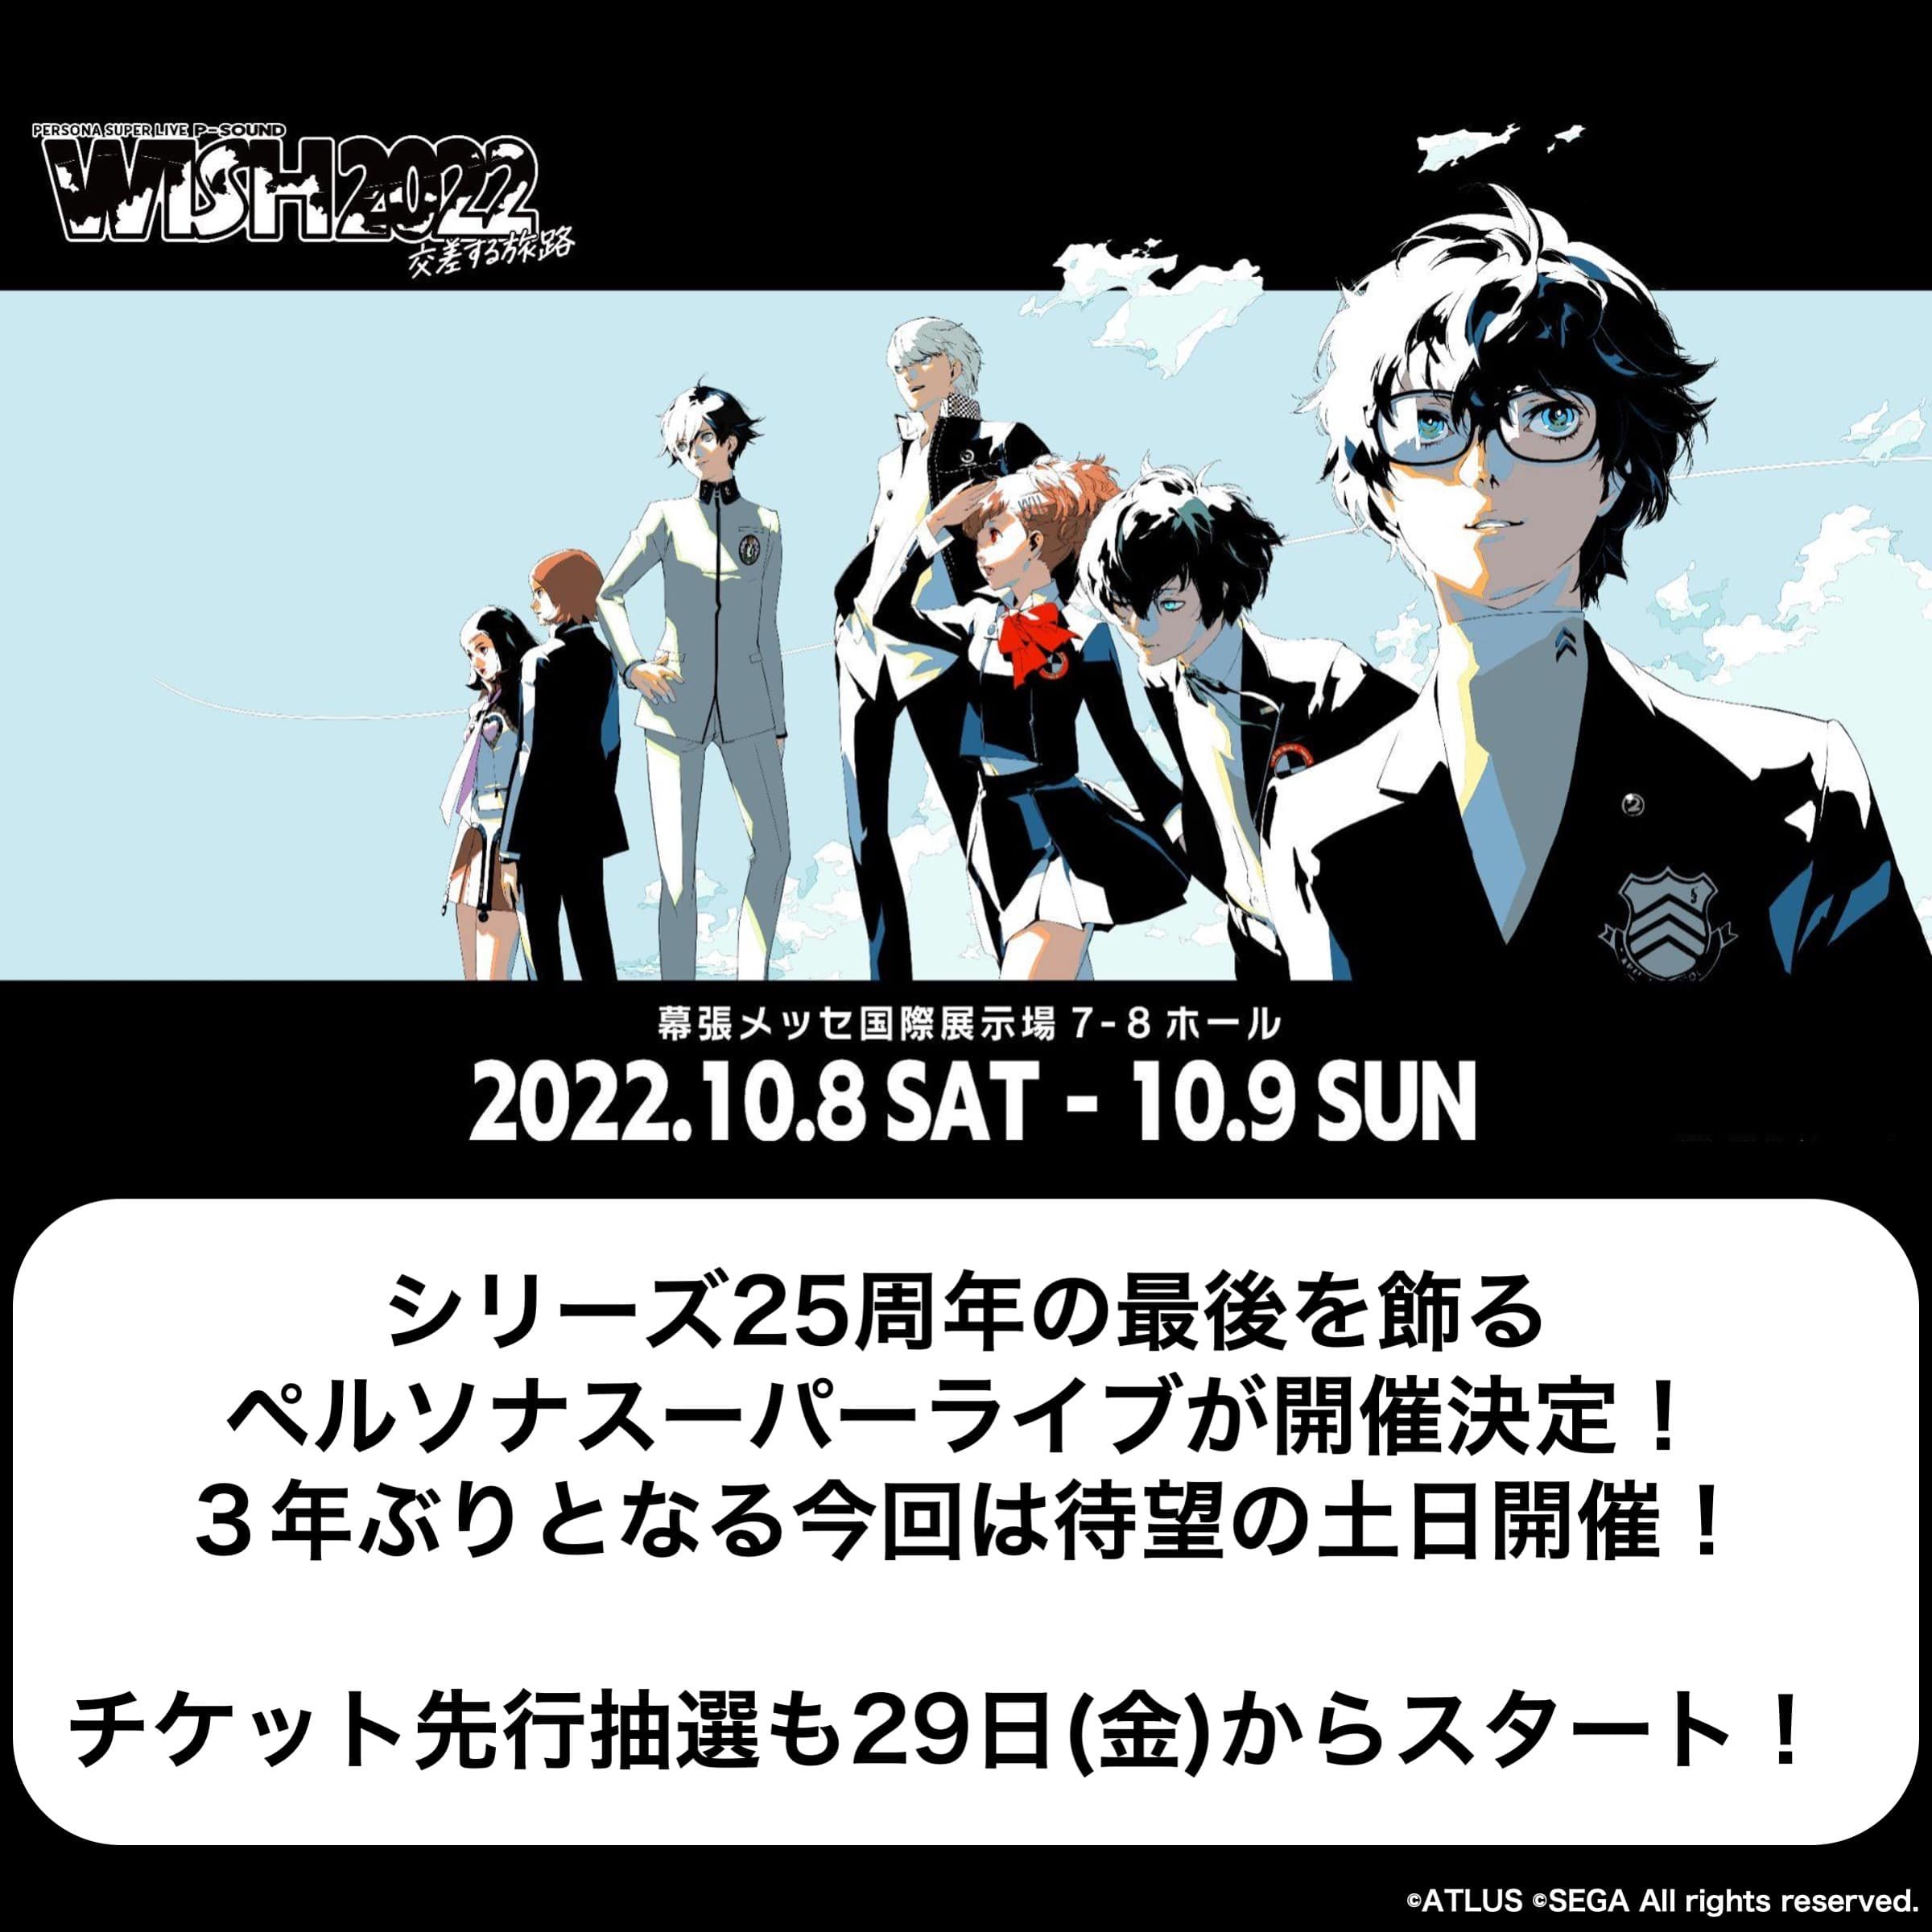 Live and streaming concert, 'Persona Super Live P-Sound Wish